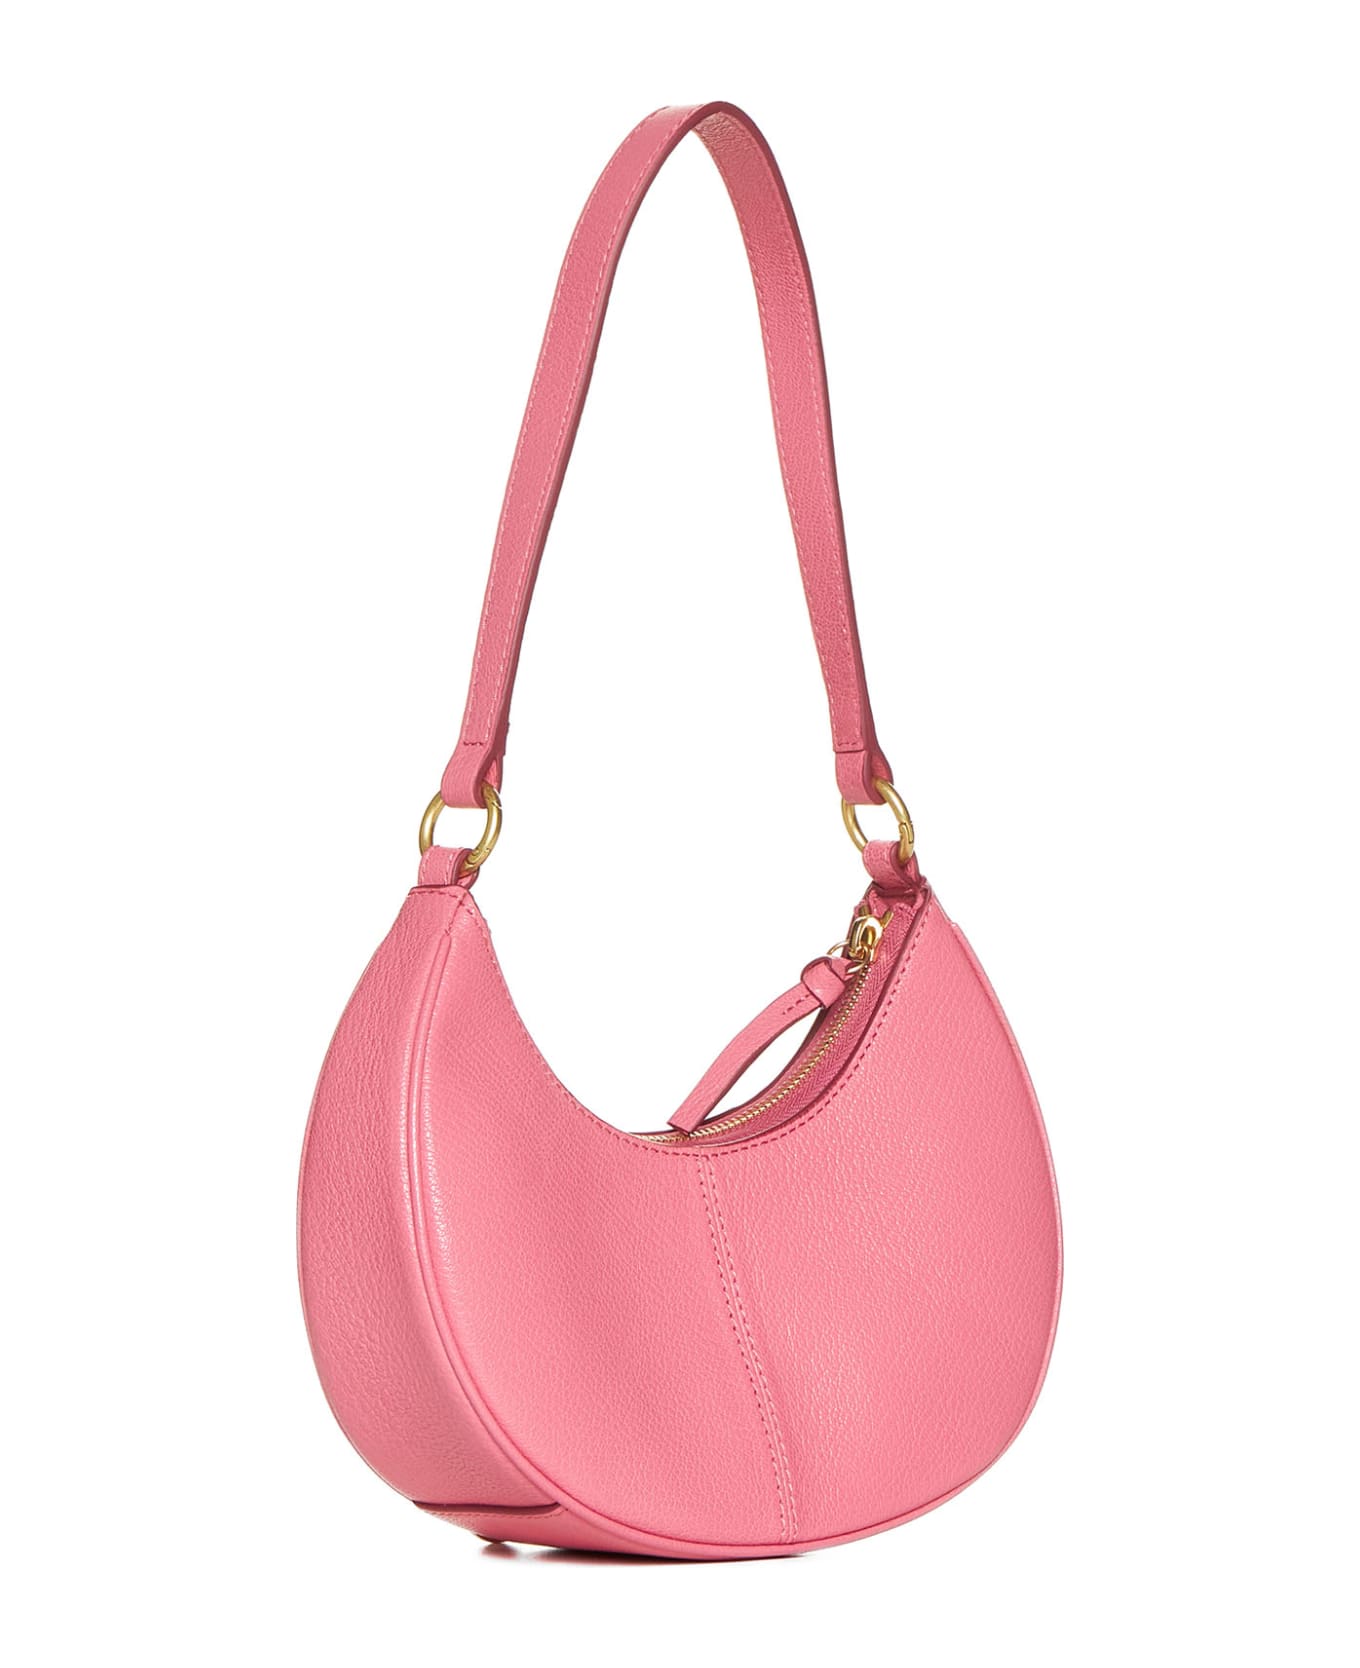 See by Chloé Shoulder Bag - Pushy pink トートバッグ